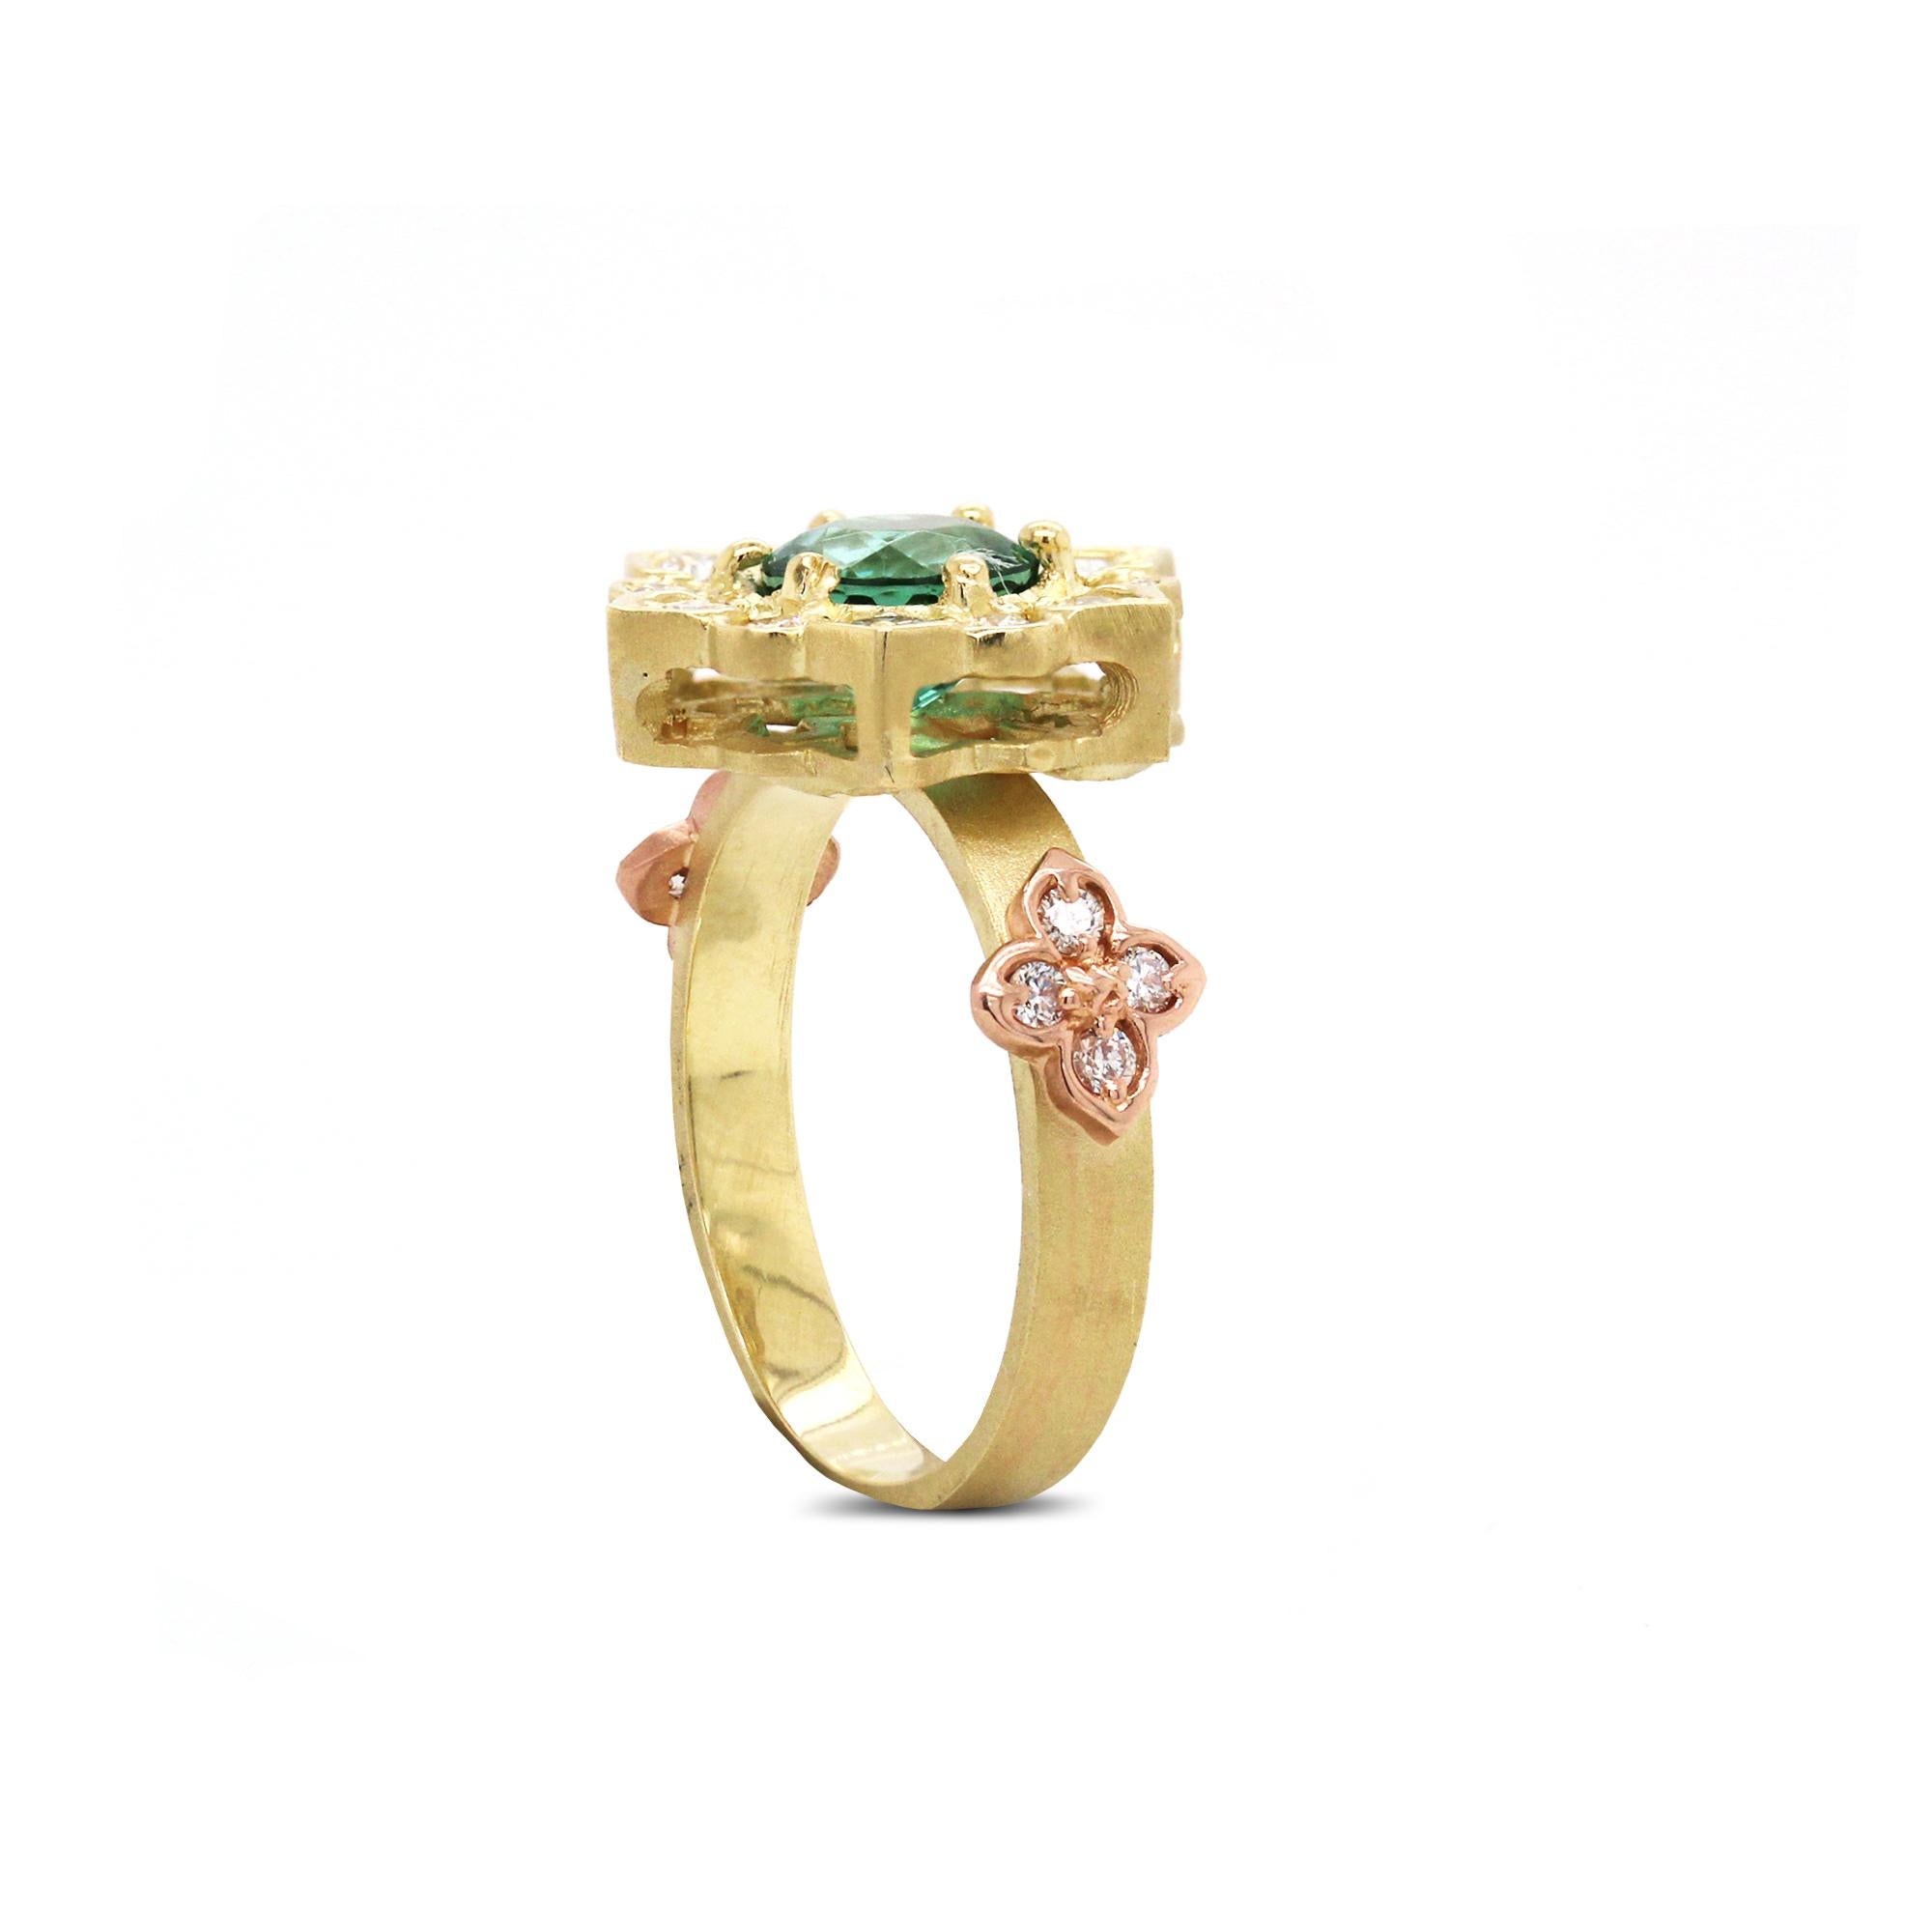 Round Cut Stambolian Two-Tone Gold and Diamond Ring with Mint Green Tourmaline Center